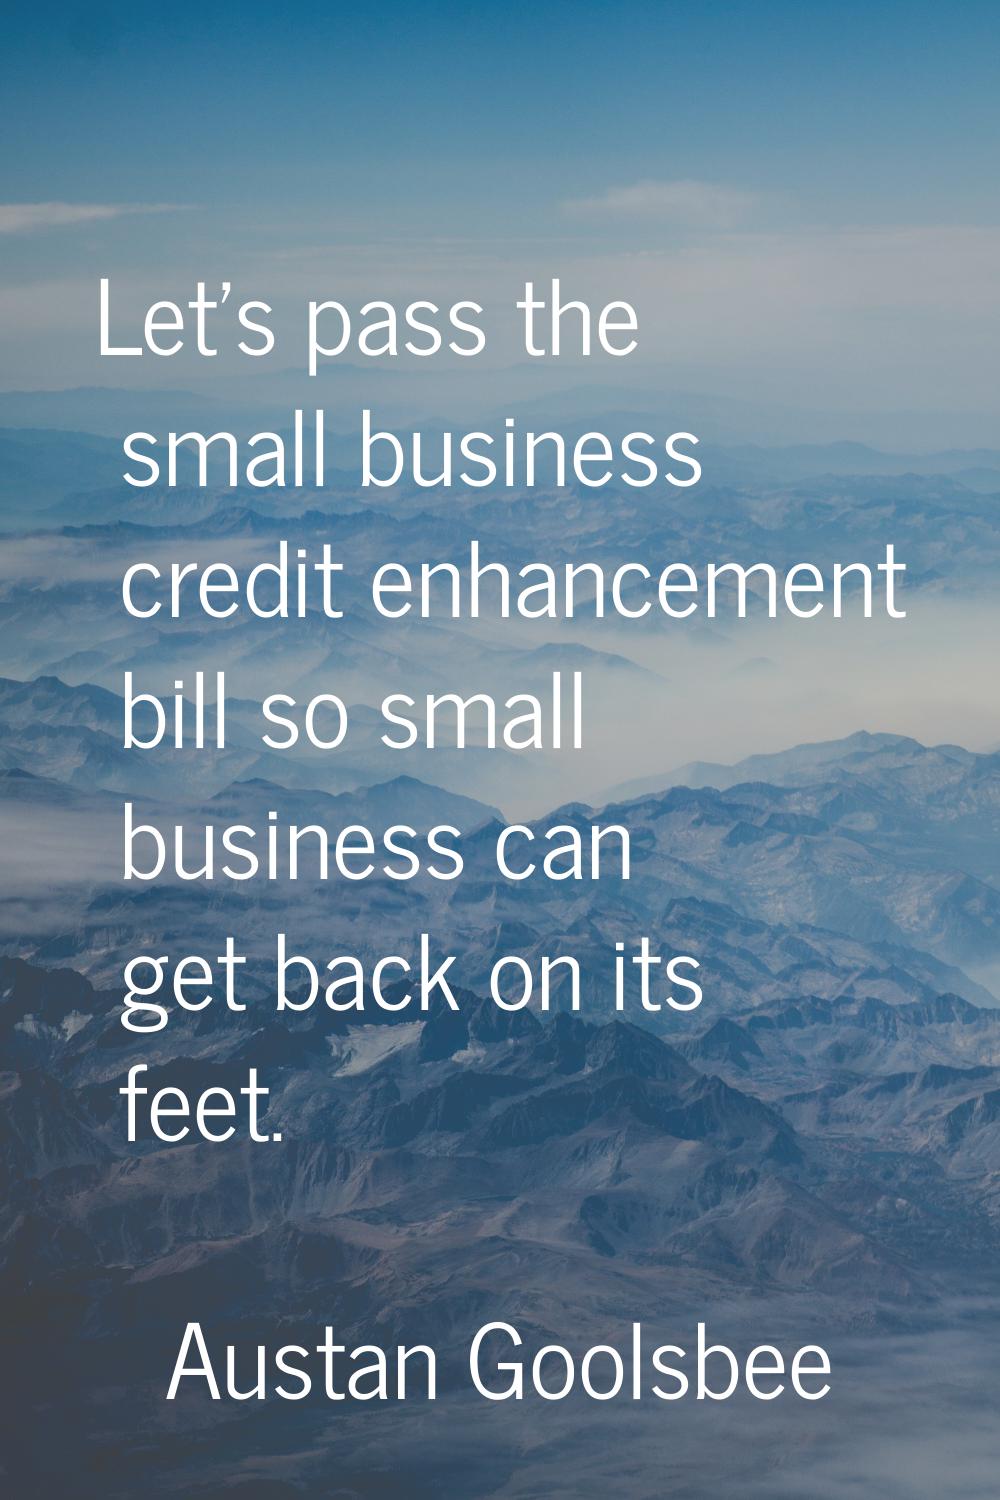 Let's pass the small business credit enhancement bill so small business can get back on its feet.